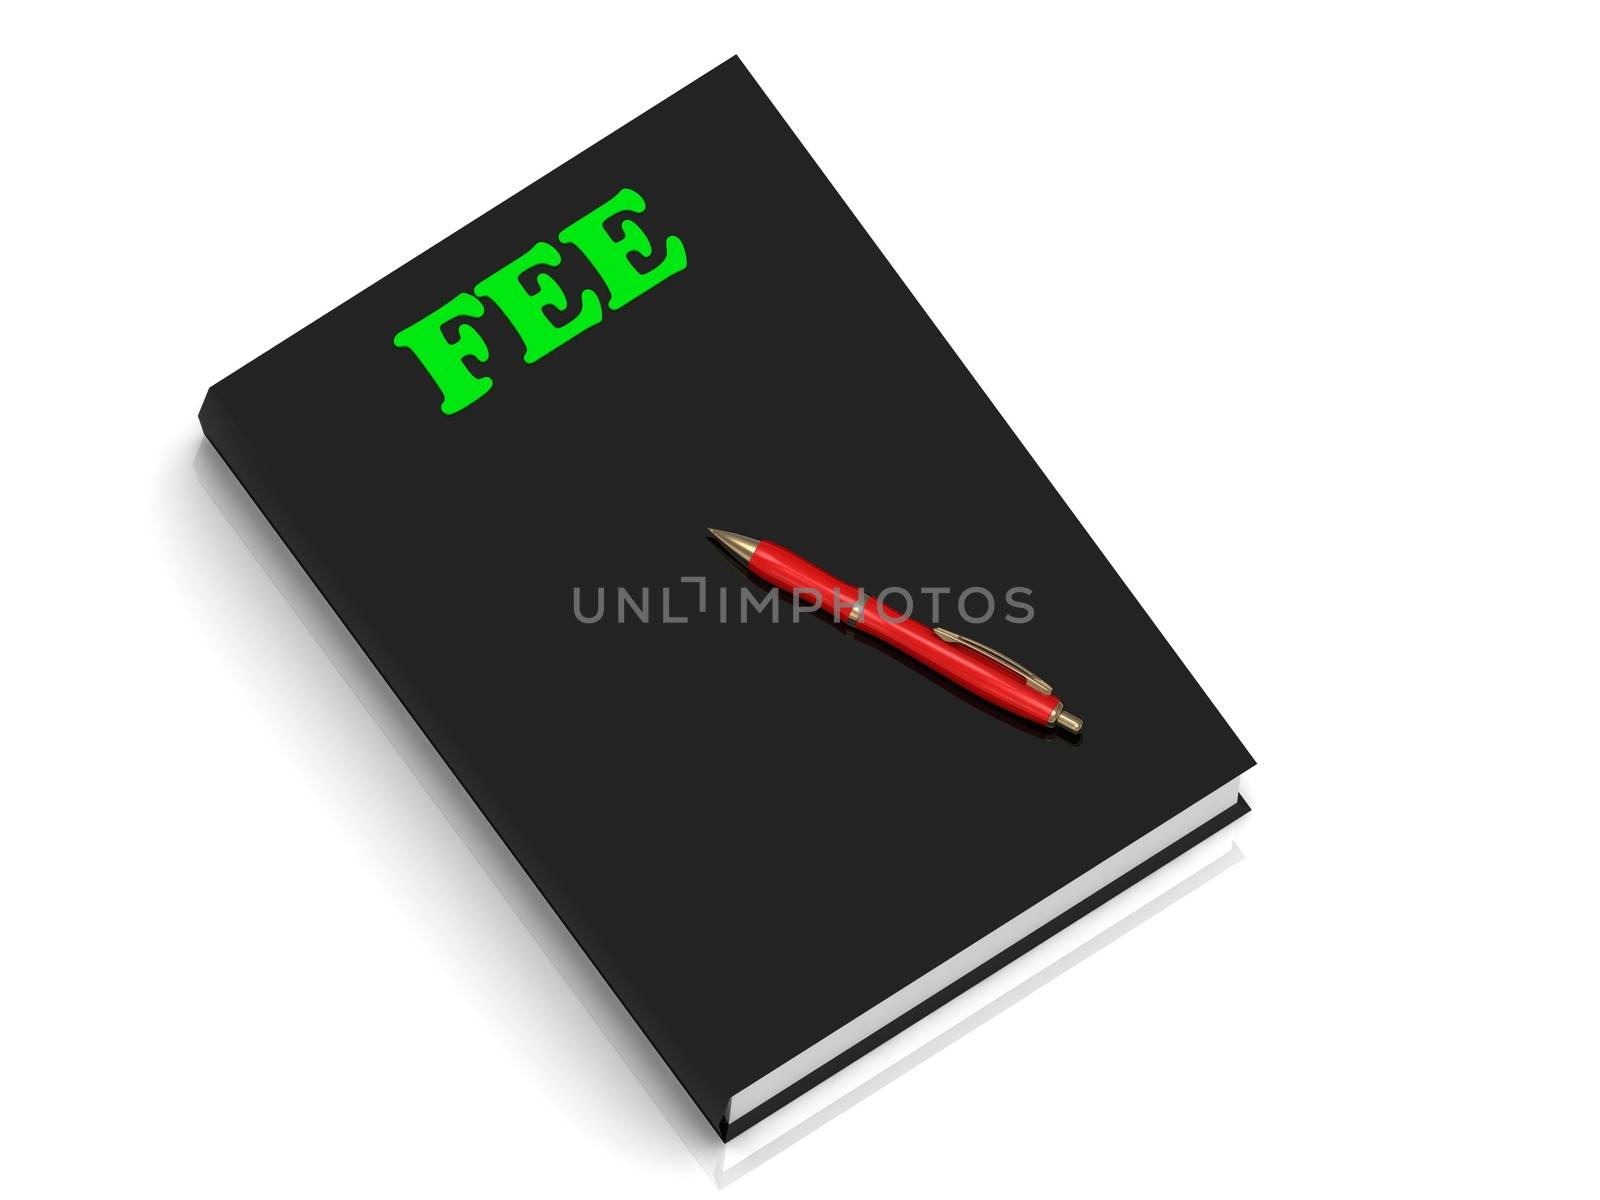 FEE- inscription of green letters on black book by GreenMost